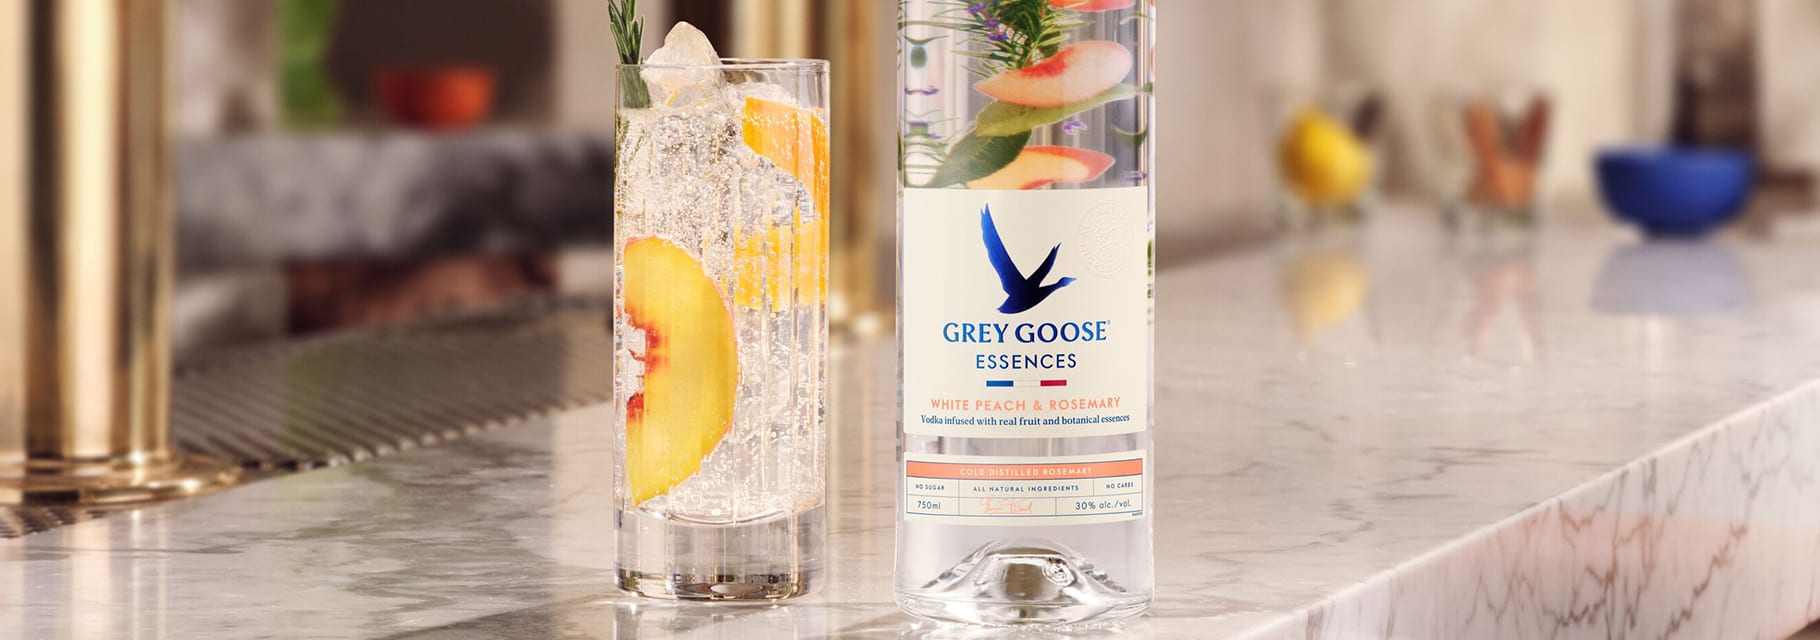 GREY GOOSE® Recommends: Our 4 Favorite Peach Vodka Drinks